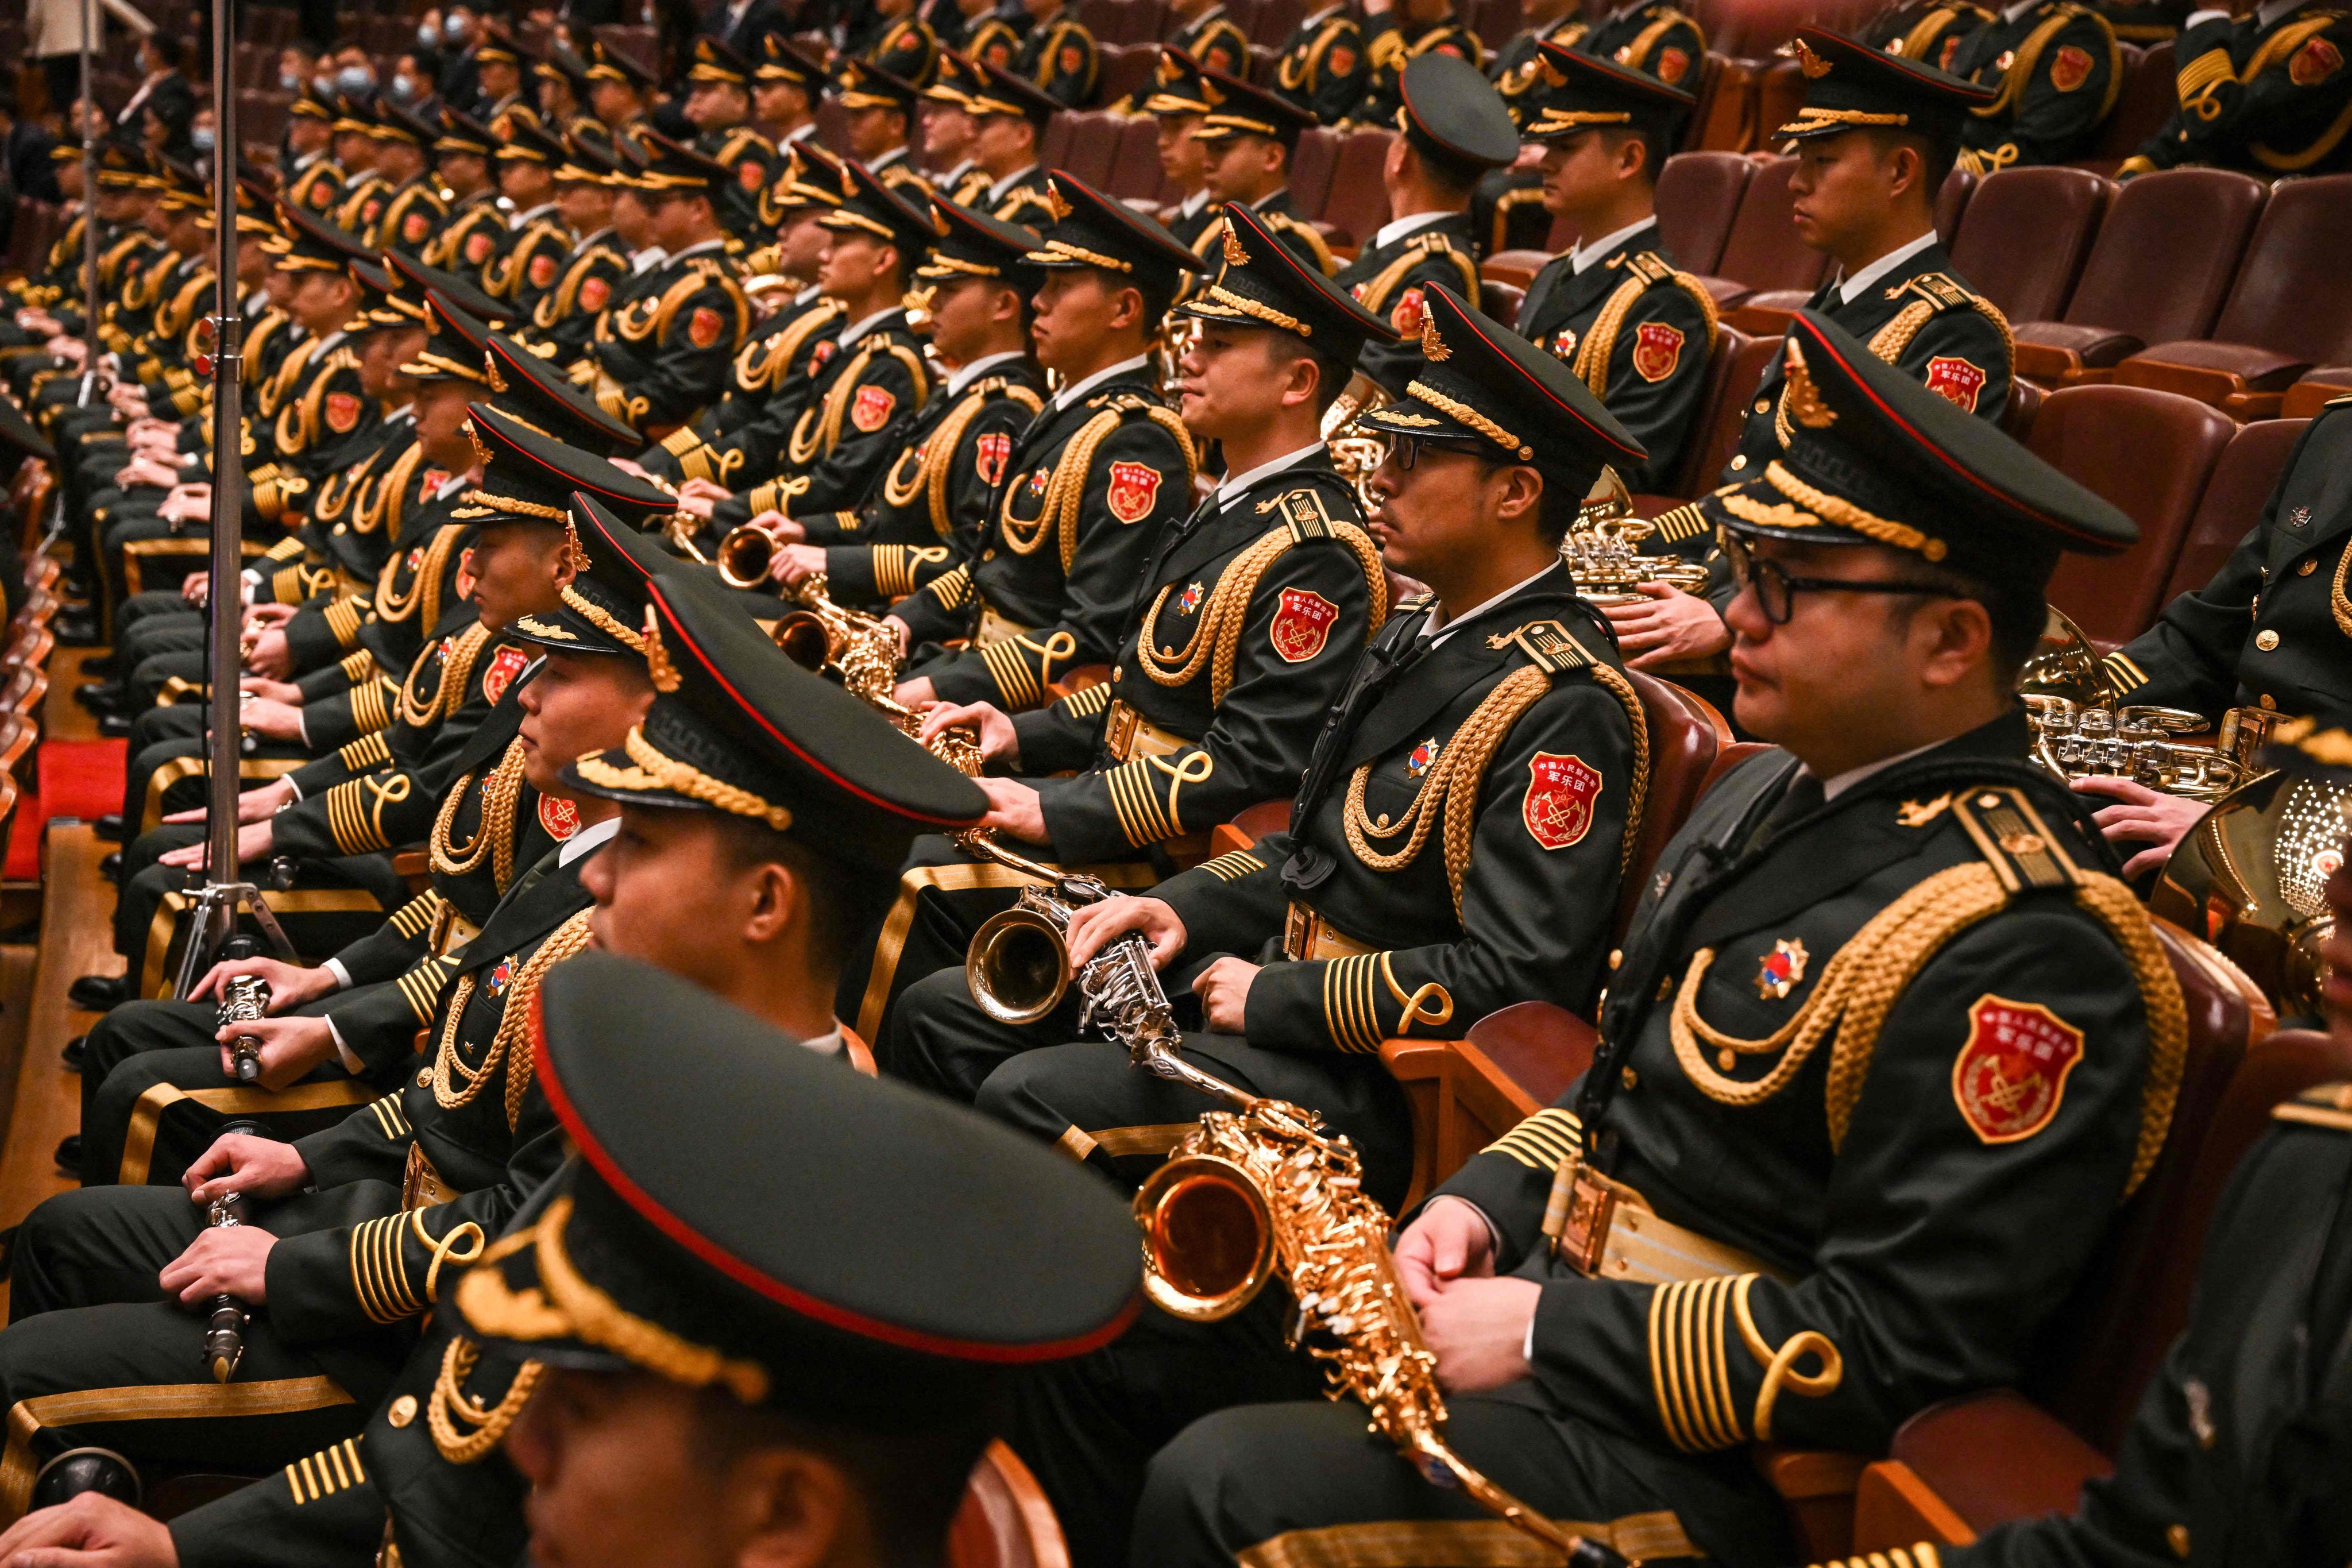 Members of the People’s Liberation Army band attend the opening session of the Communist Party congress at the Great Hall of the People in Beijing on Sunday. Photo: AFP